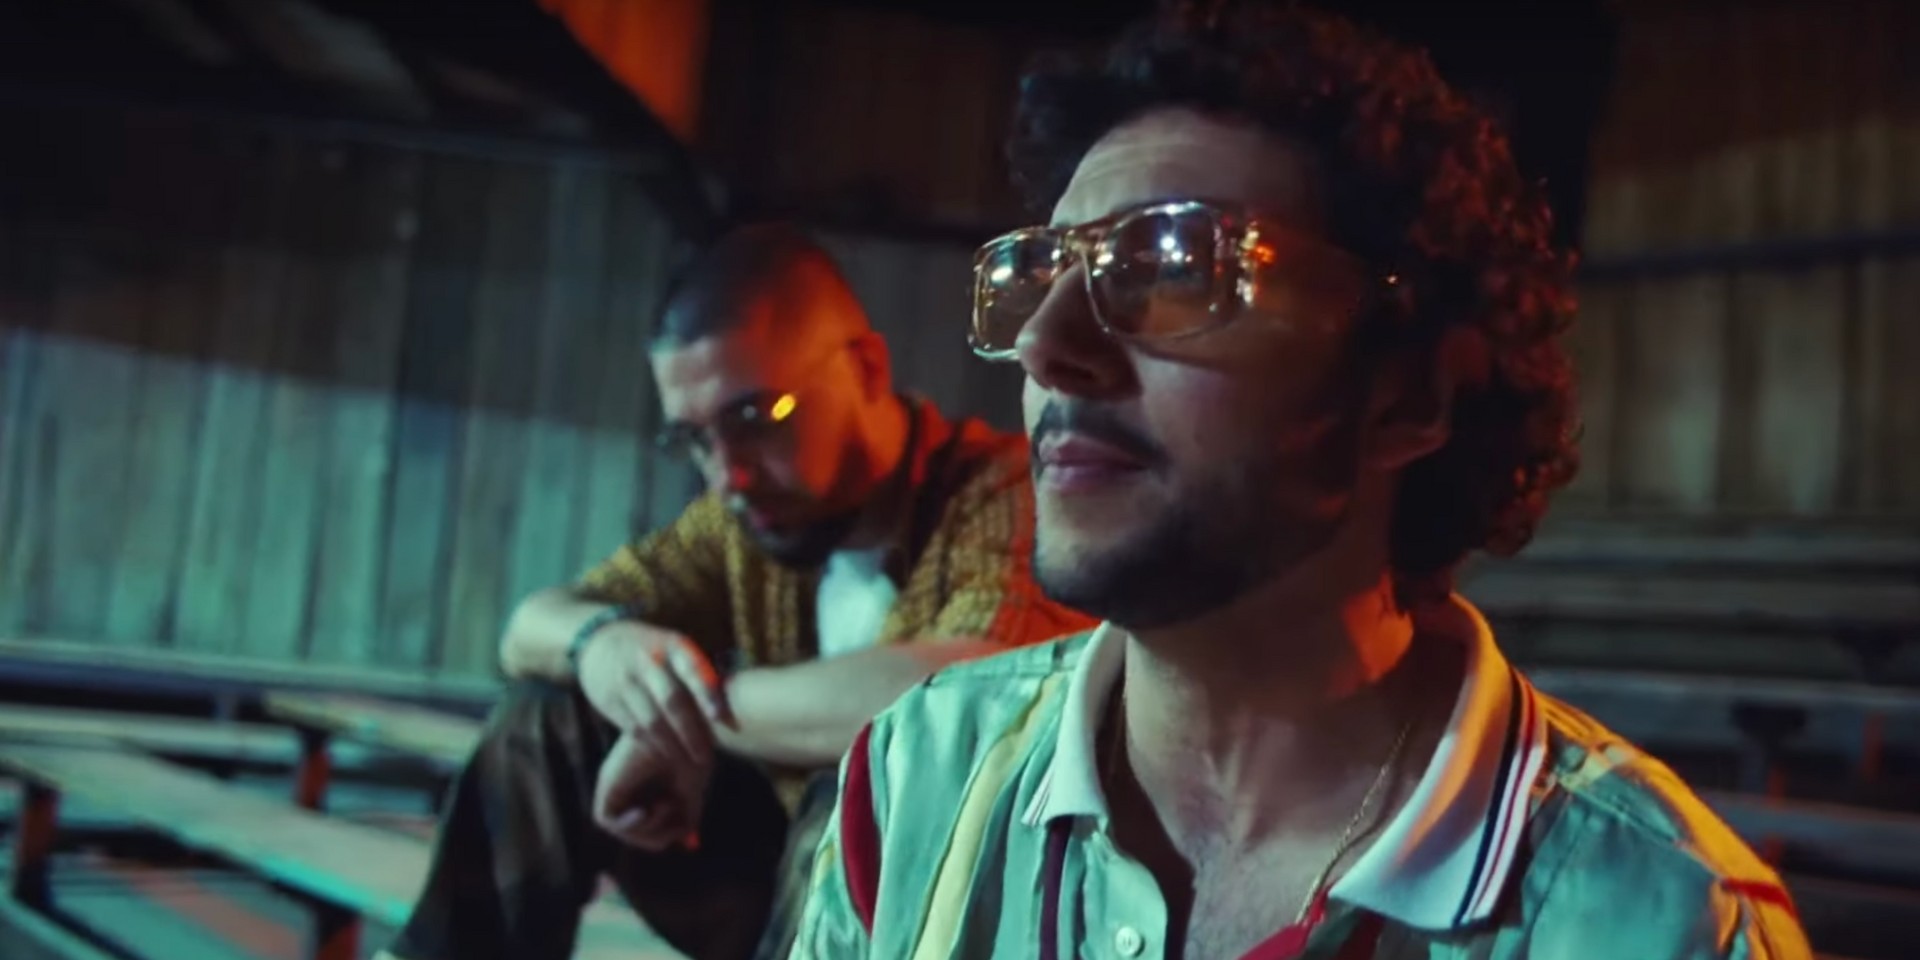 Majid Jordan release psychedelic music video for Khalid collaboration, 'Caught Up' – watch